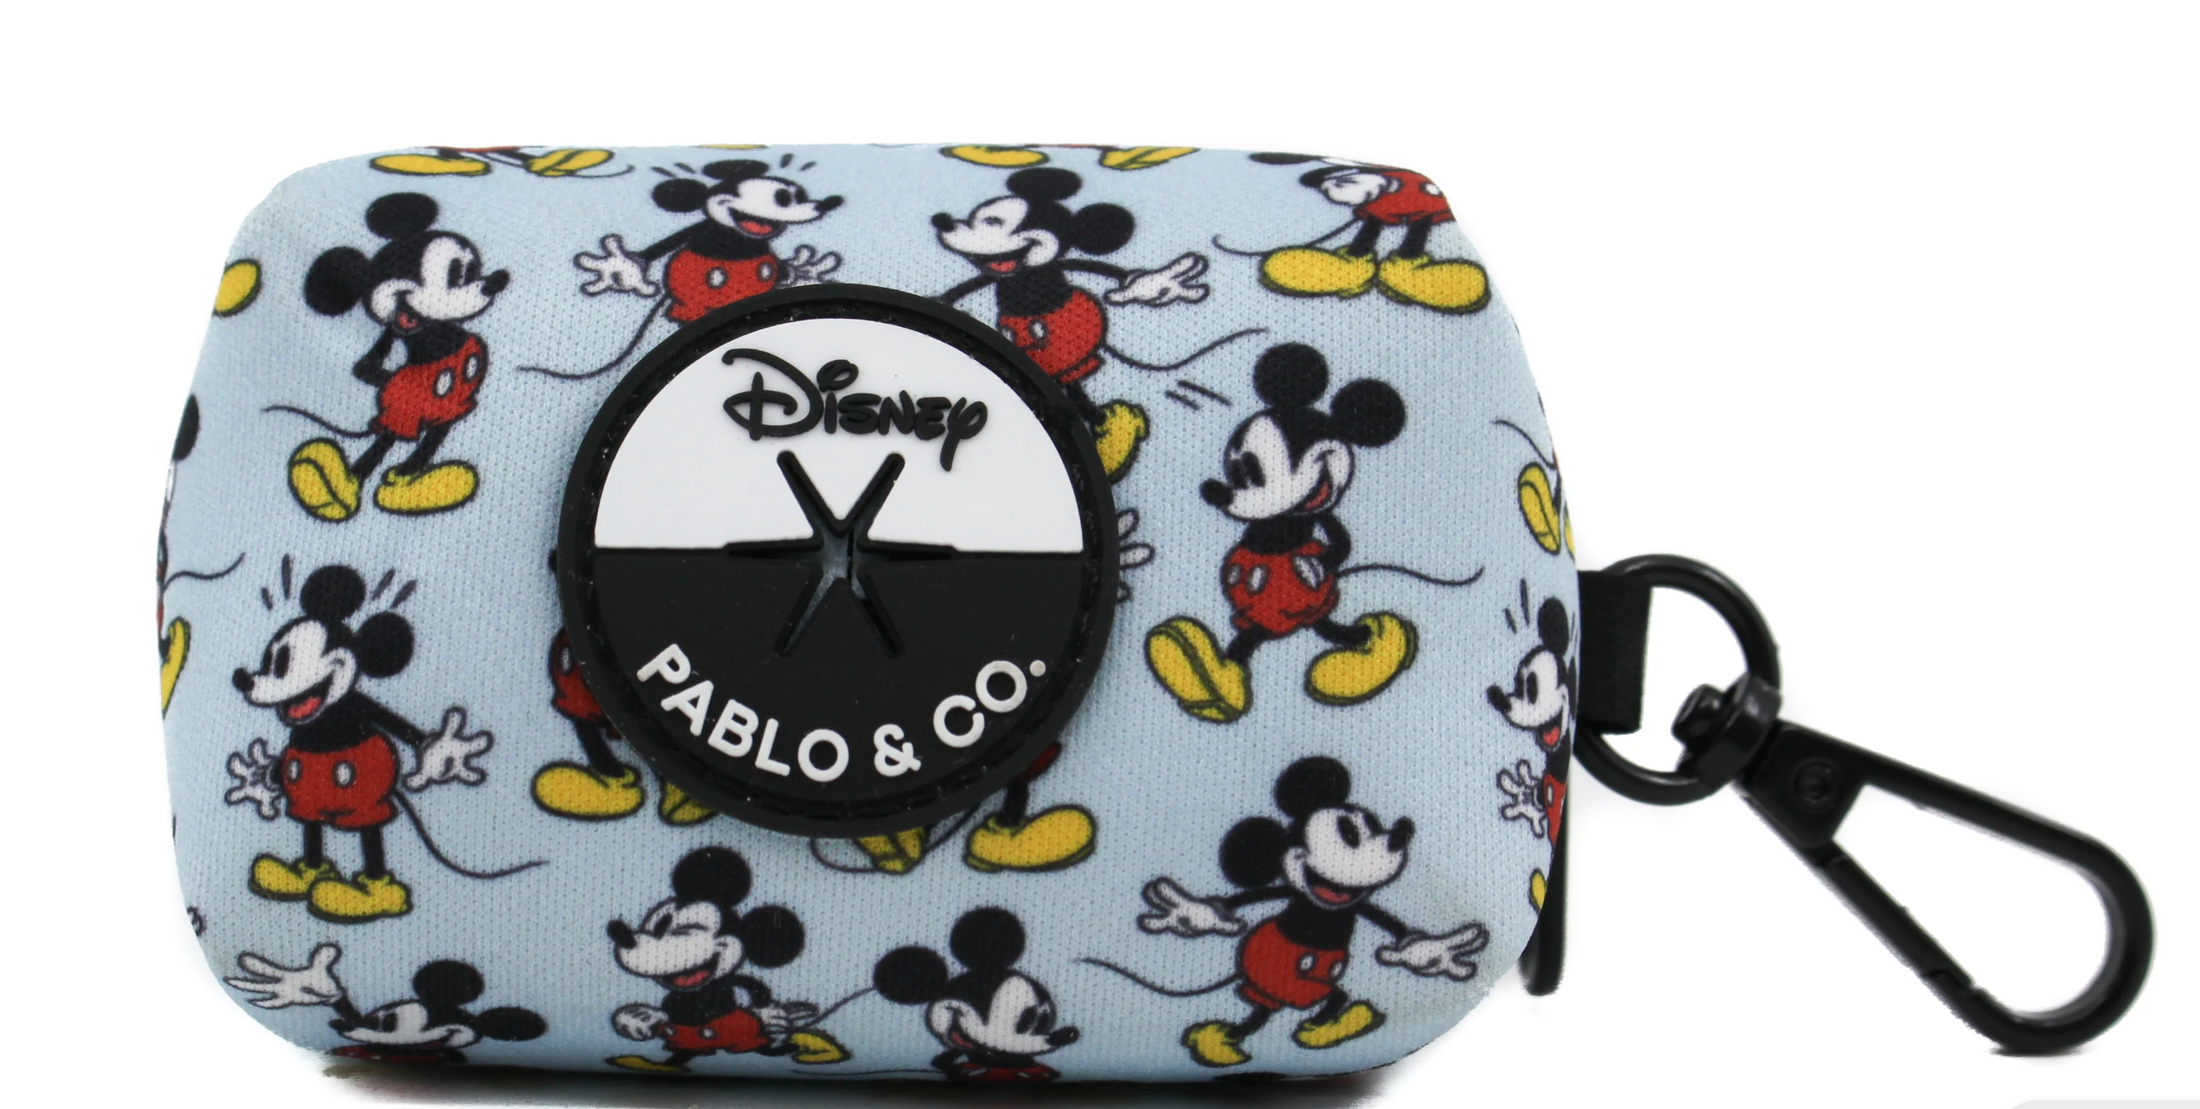 Mickey Mouse Poop Bag by Pablo and Cocollars